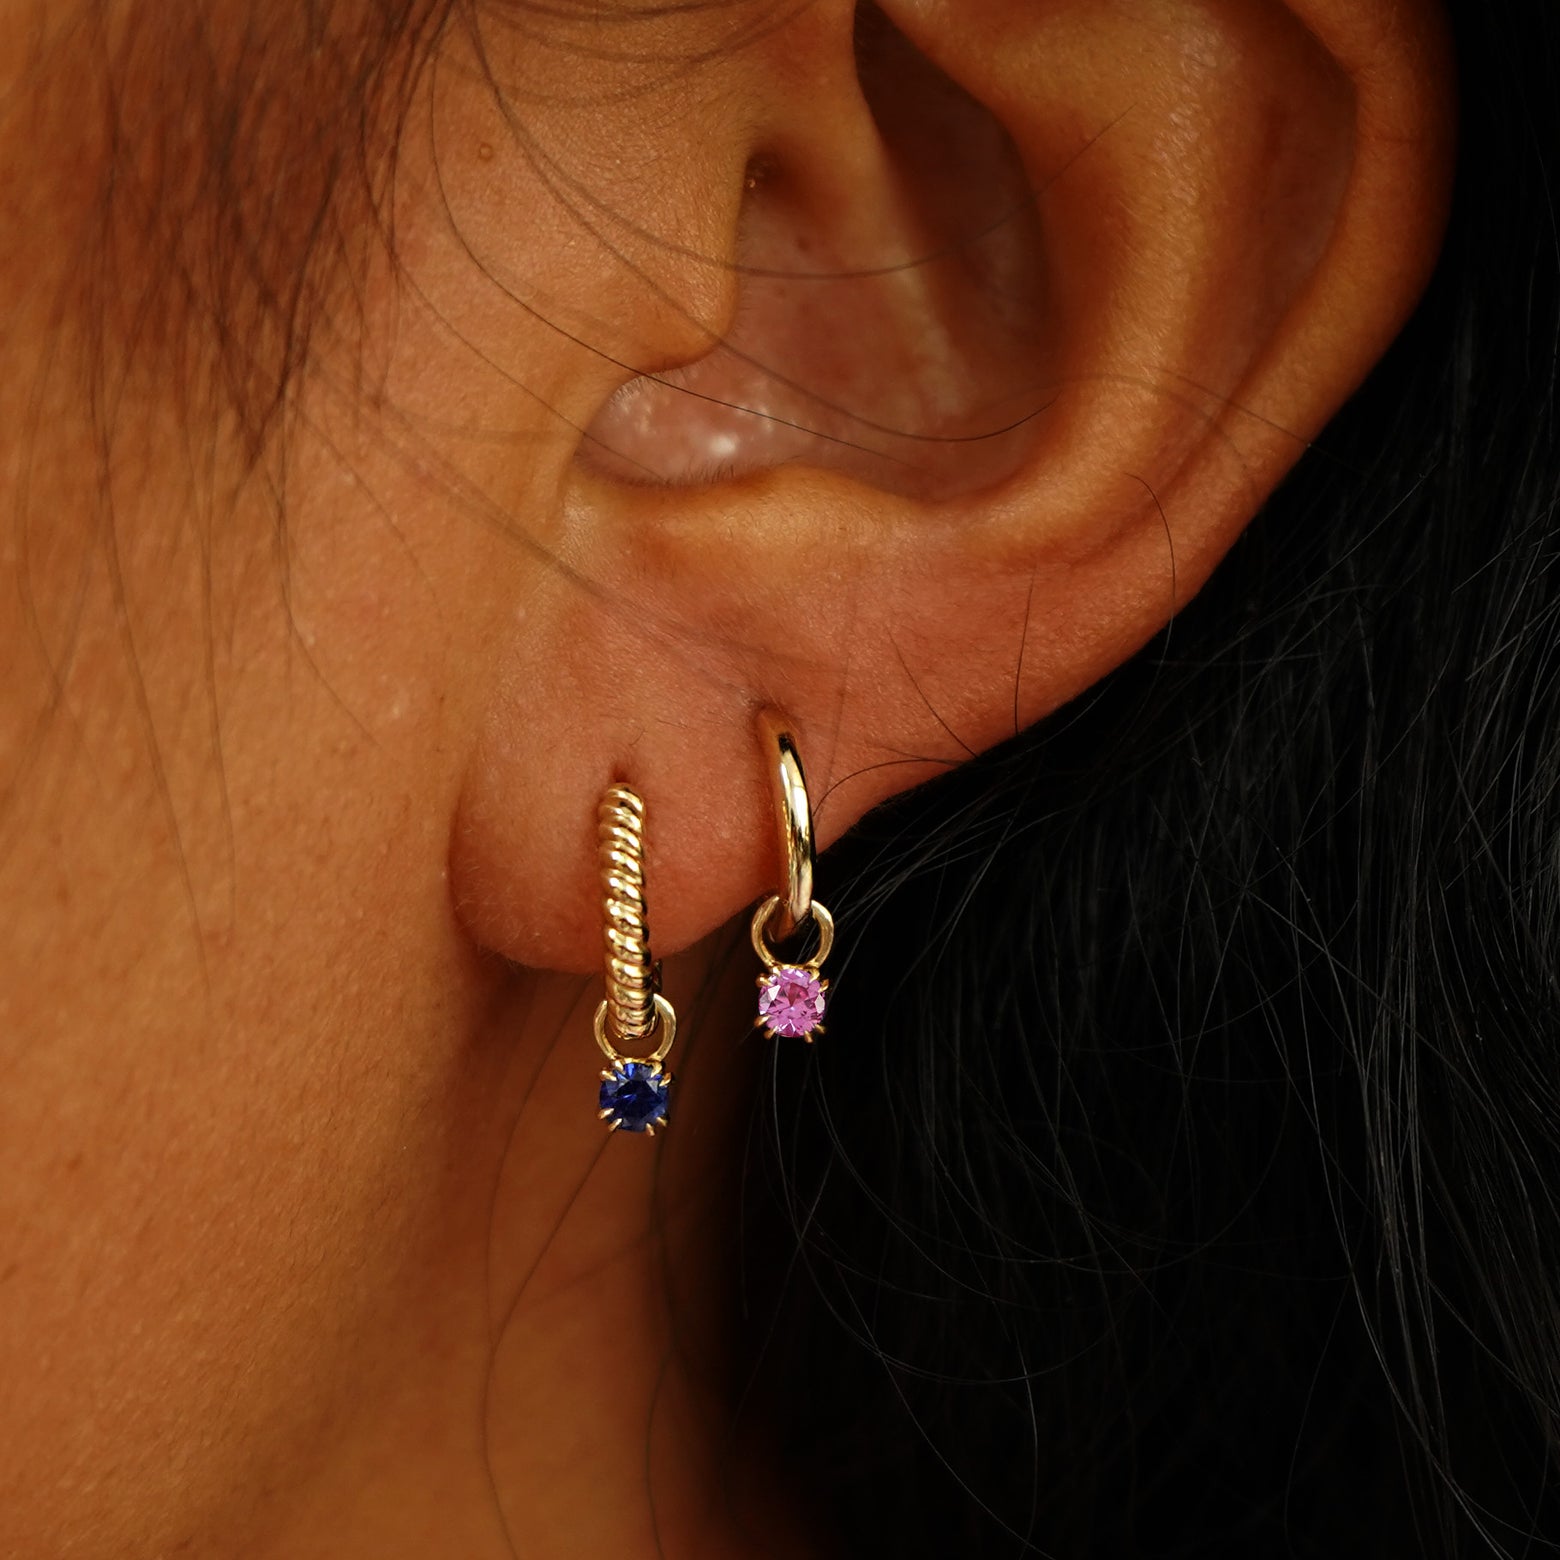 A model's ear wearing a Blue Sapphire Charm on a Rope Huggie and a Pink Sapphire Charm on a Curvy Huggie